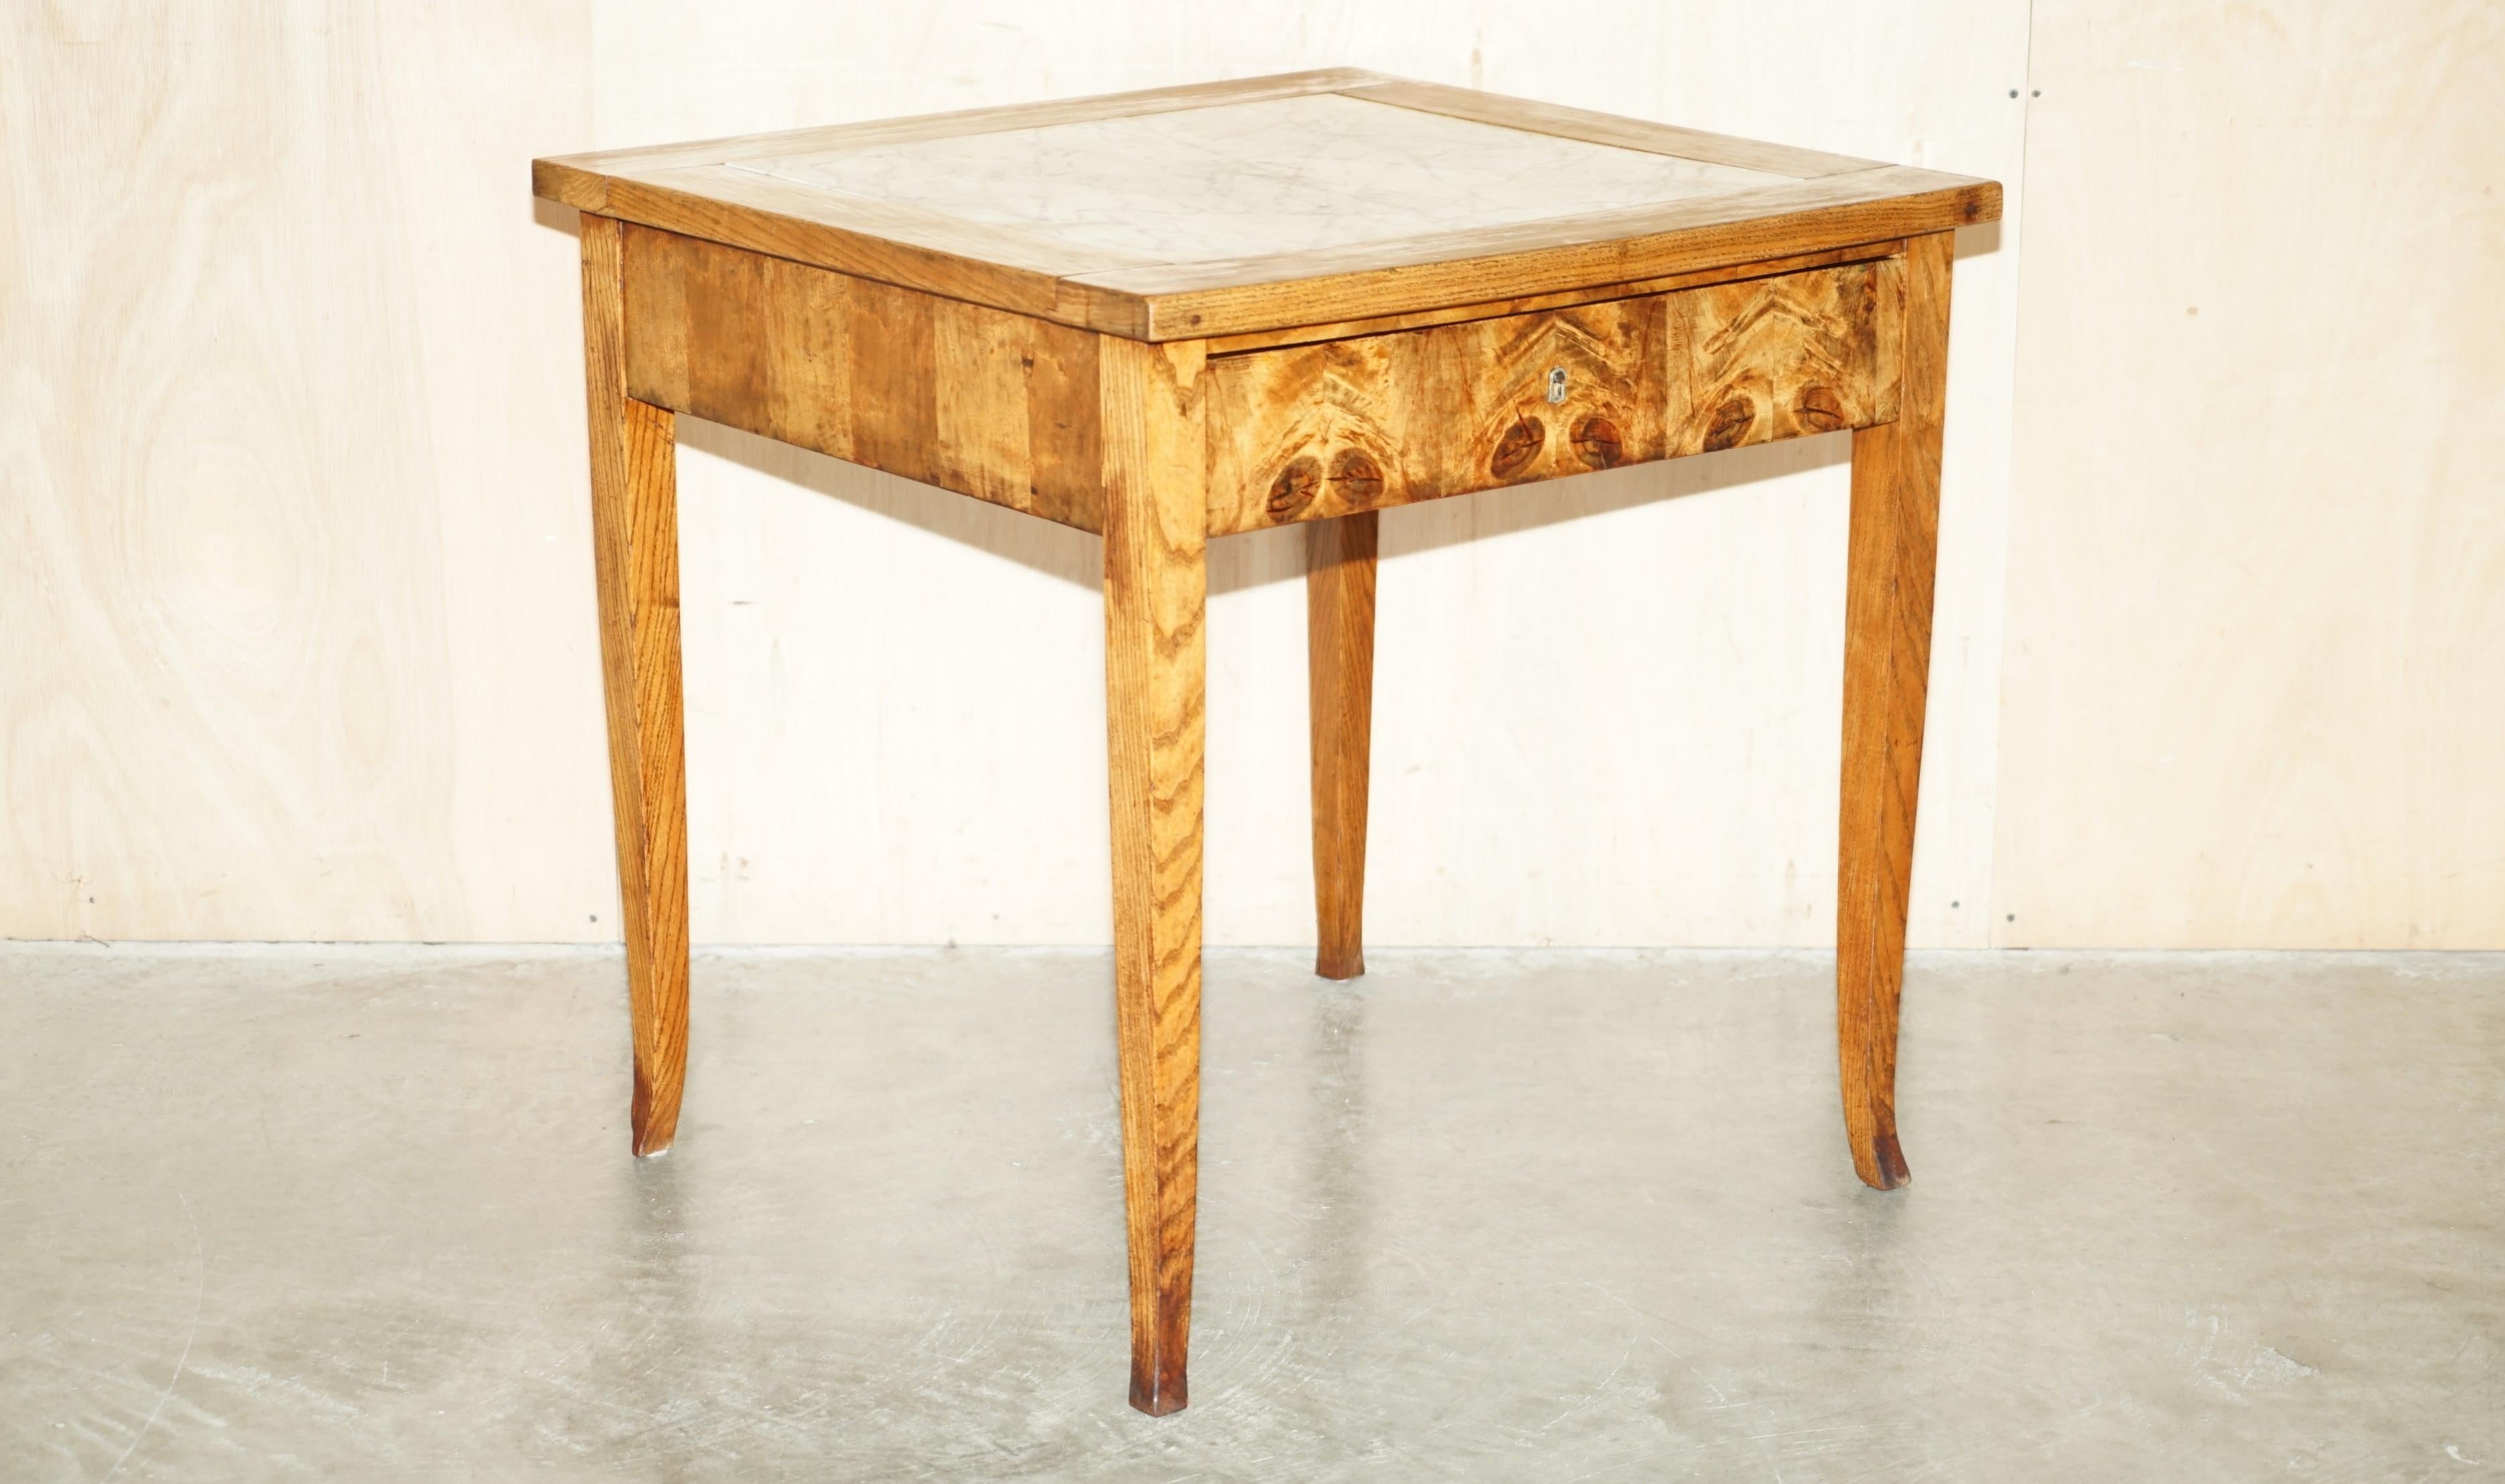 Royal House Antiques

Royal House Antiques is delighted to offer for sale this absolutely stunning original French Oyster wood, marble topped food preparation table 

Please note the delivery fee listed is just a guide, it covers within the M25 only